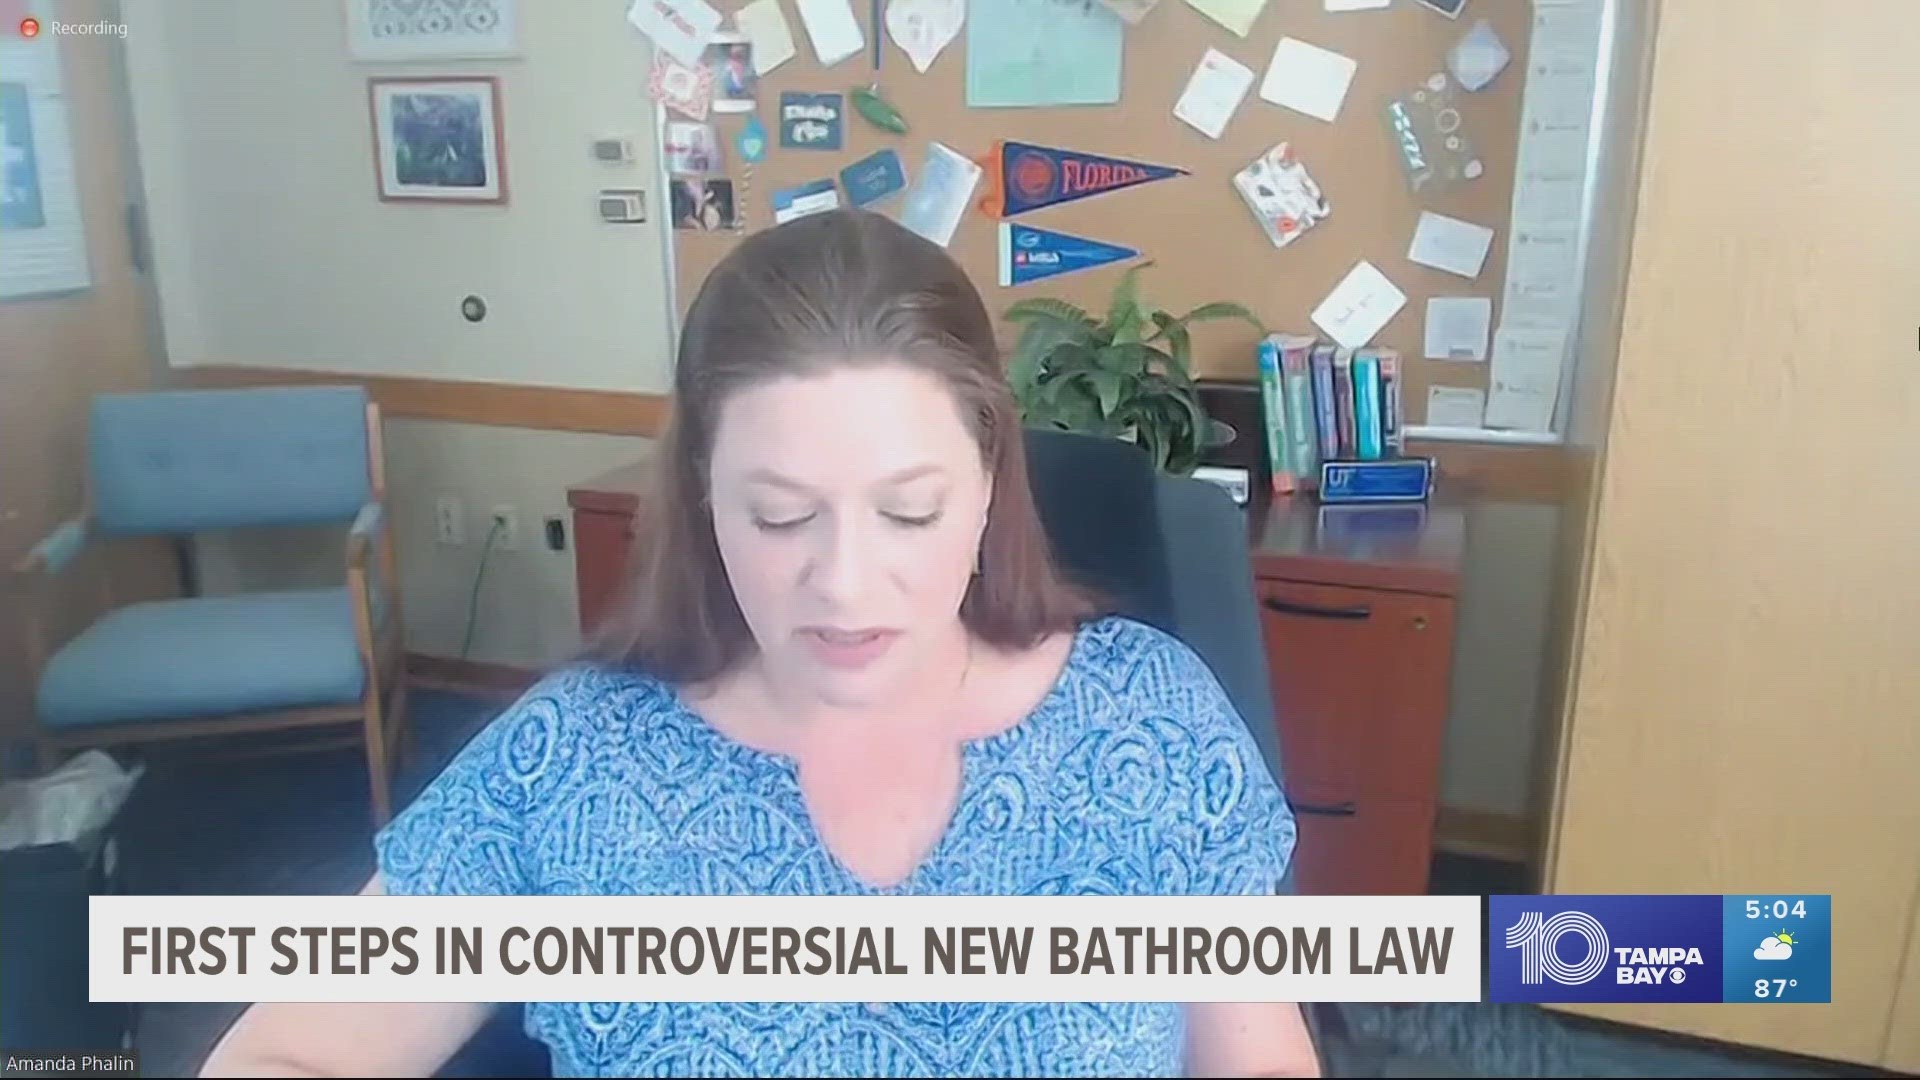 An update now on a controversial new law that requires designation of restrooms for exclusive use by females and exclusive use by males.